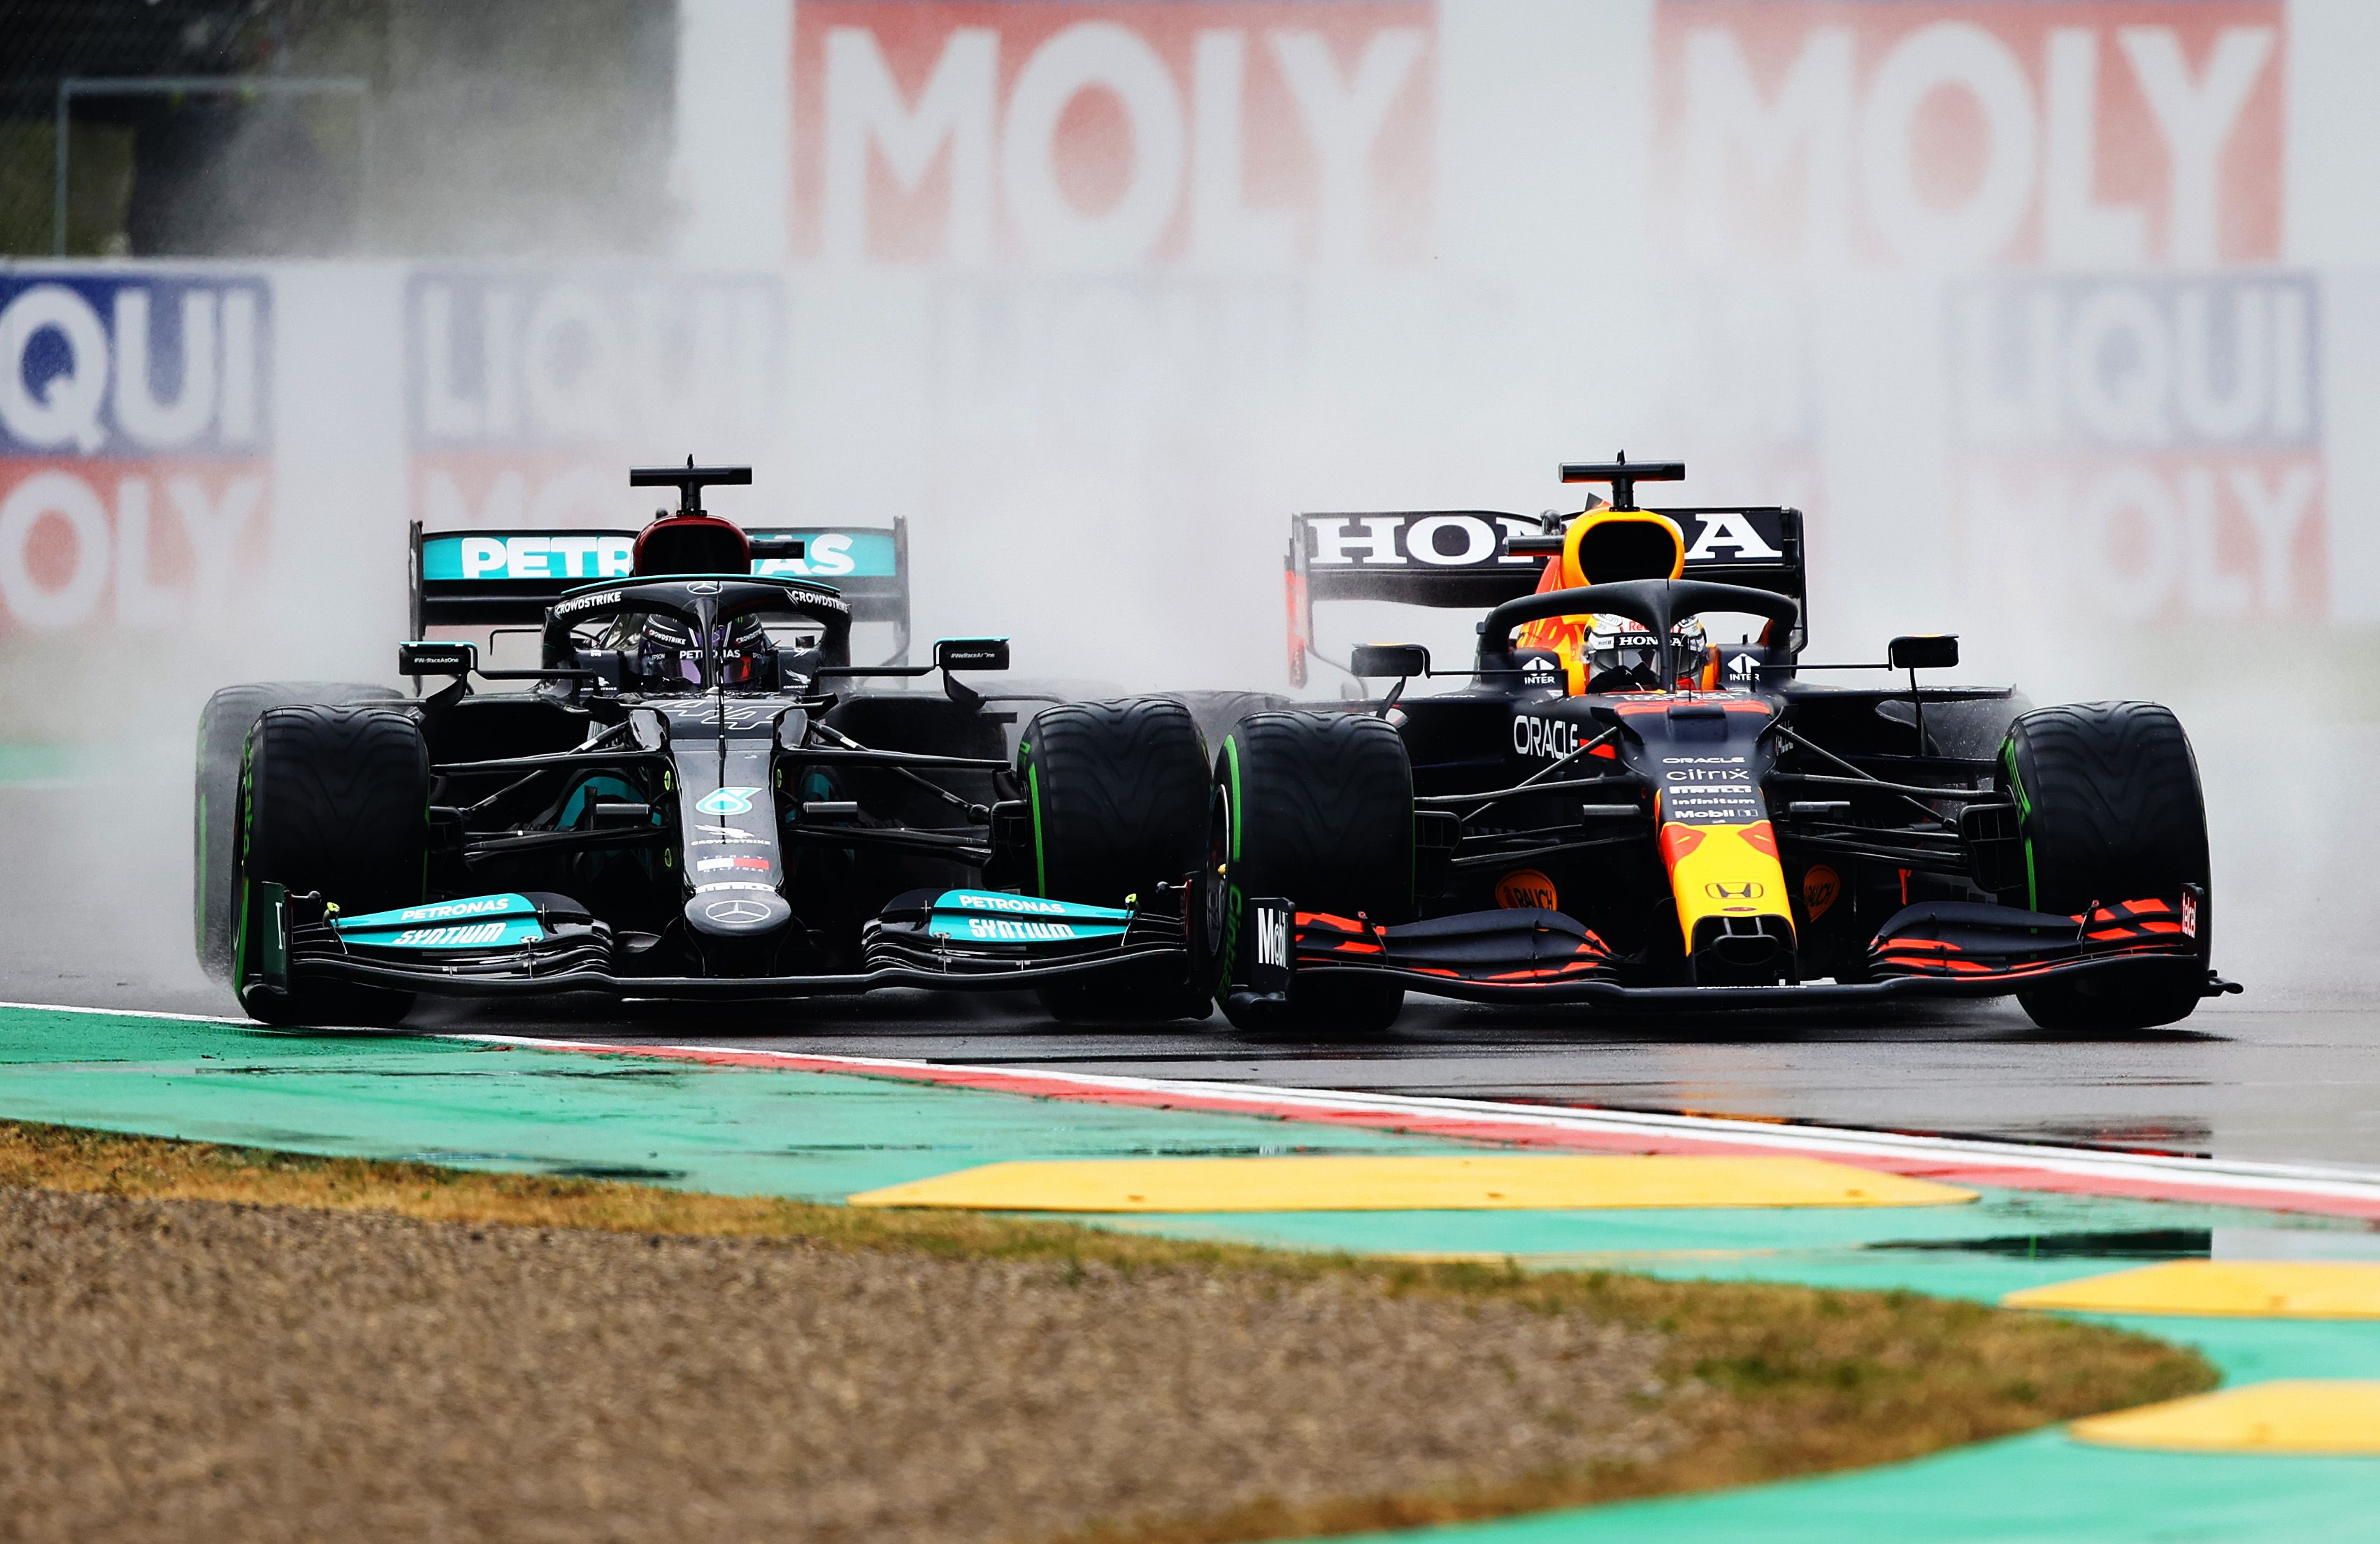 Lewis Hamilton of Great Britain with the (44) Mercedes AMG Petronas F1 Team Mercedes W12 and Max Verstappen of the Netherlands with the (33) Red Bull Racing RB16B Honda battle it out during the Emilia Romagna F1 Grand Prix at the Autodromo Enzo e Dino Ferrari April 18 2021 in Imola, Italy.